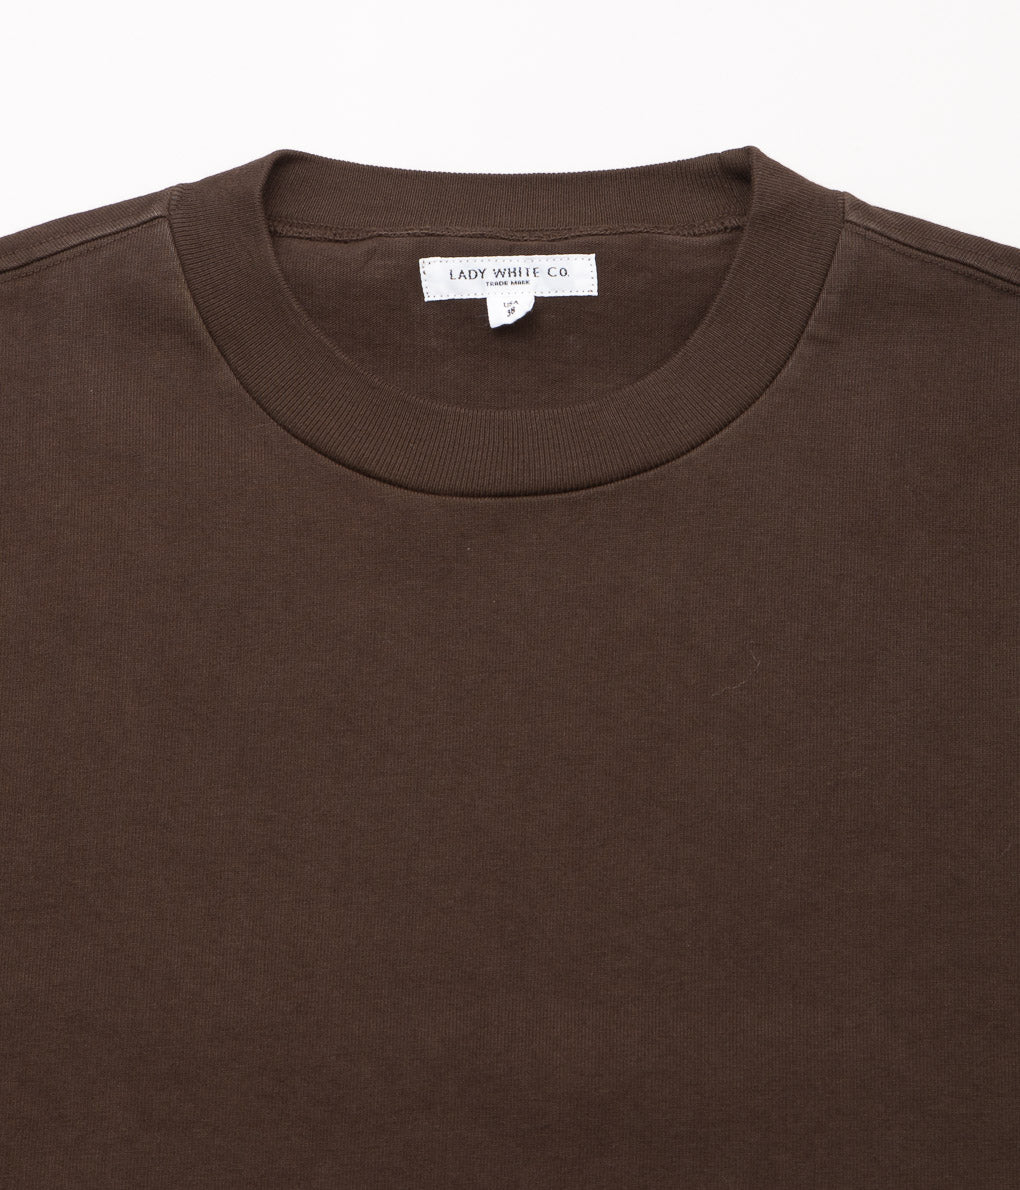 LADY WHITE CO. " RUGBY T-SHIRT"(FIELD BROWN)